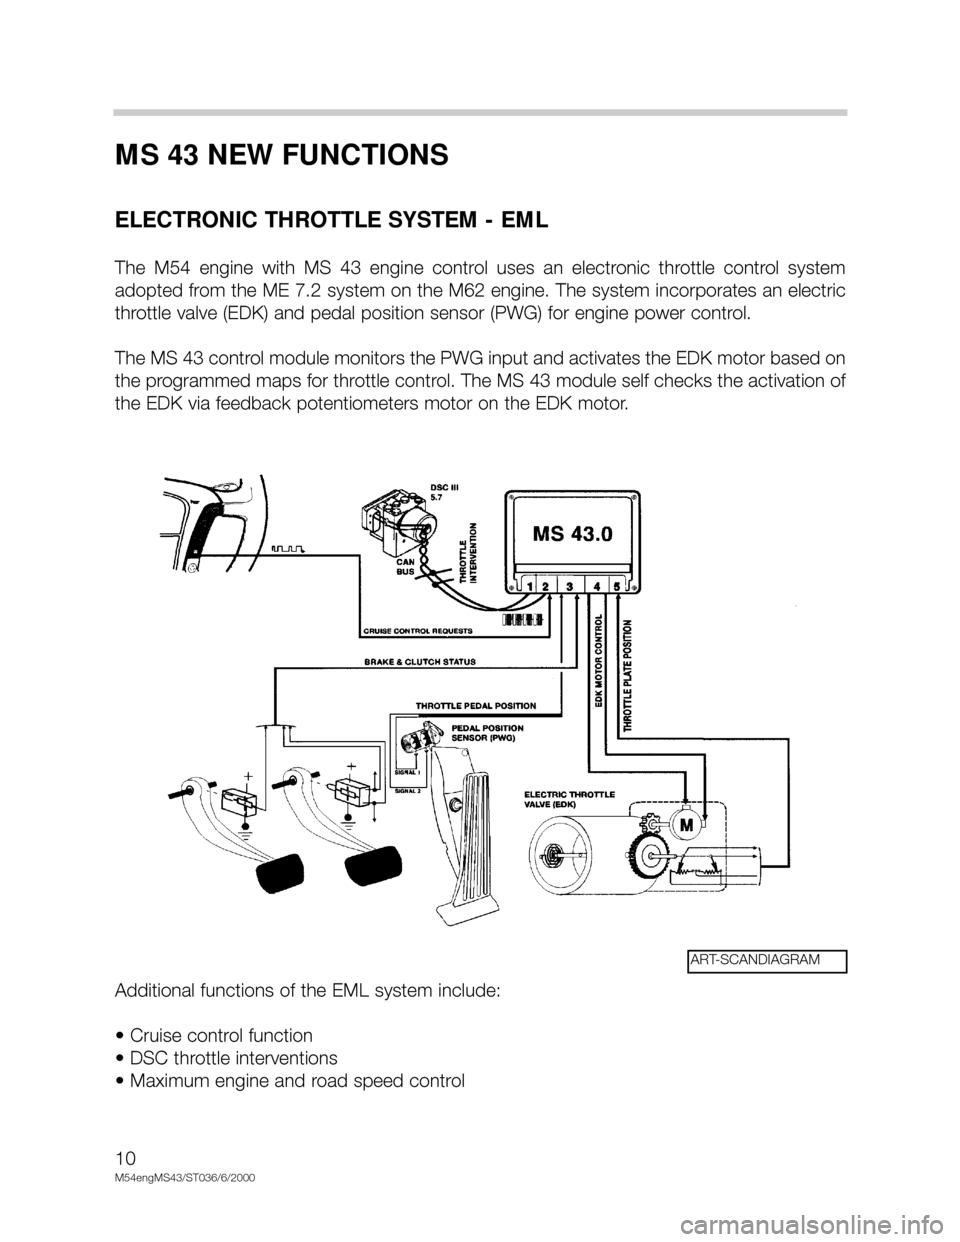 BMW X5 2003 E53 M54 Engine Workshop Manual 10
M54engMS43/ST036/6/2000
MS 43 NEW FUNCTIONS
ELECTRONIC THROTTLE SYSTEM - EML
The  M54  engine  with  MS  43  engine  control  uses  an  electronic  throttle  control  system
adopted from the ME 7.2